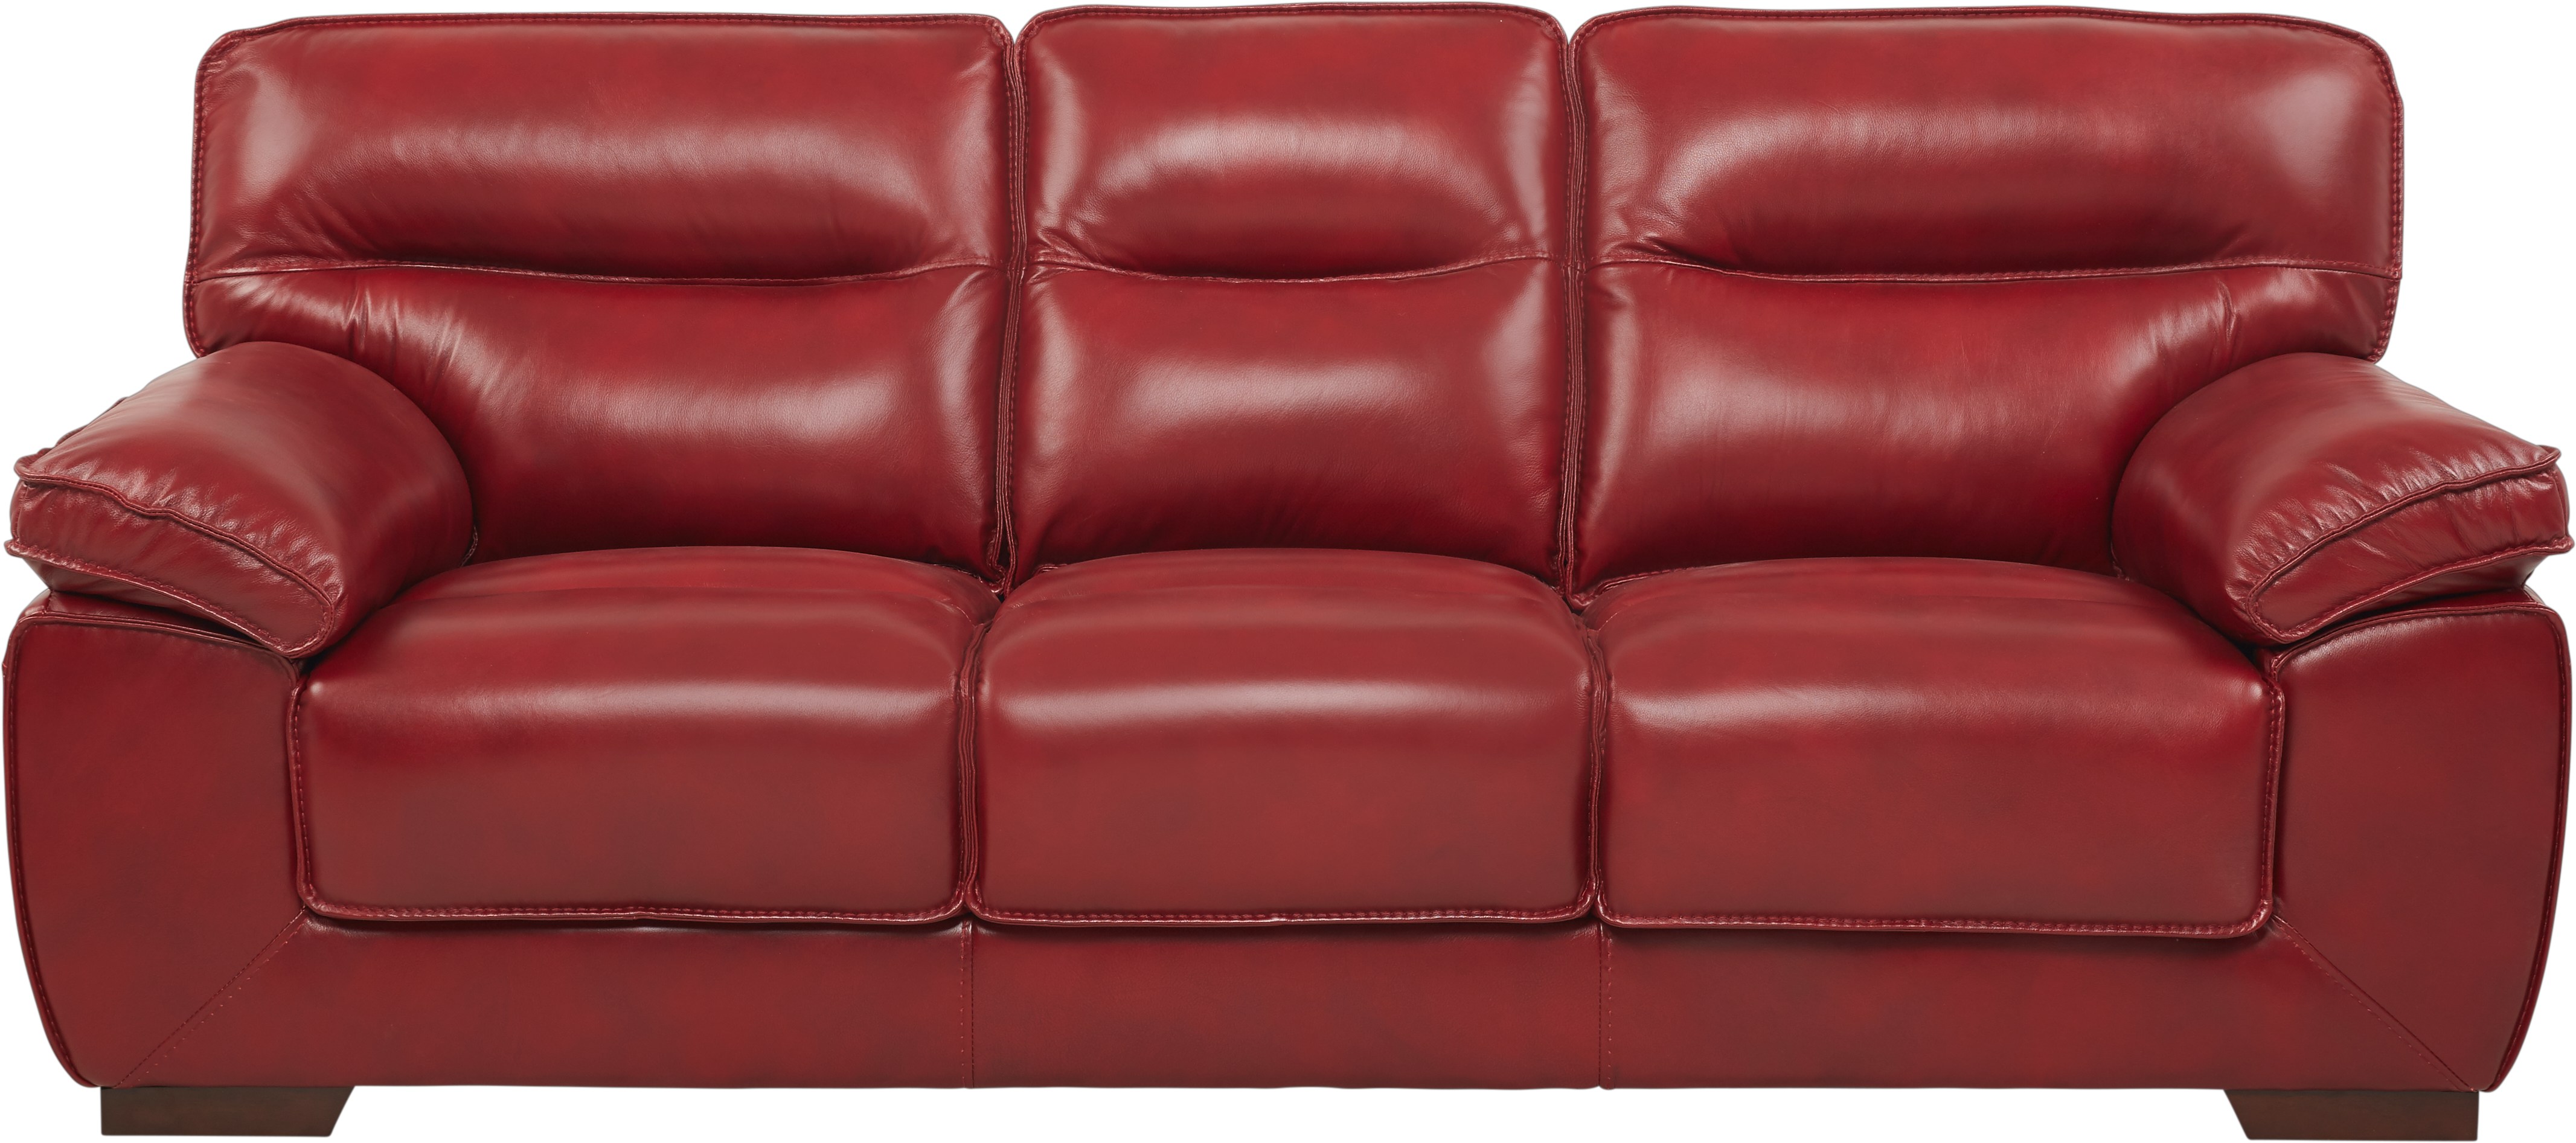 red leather sofa paint